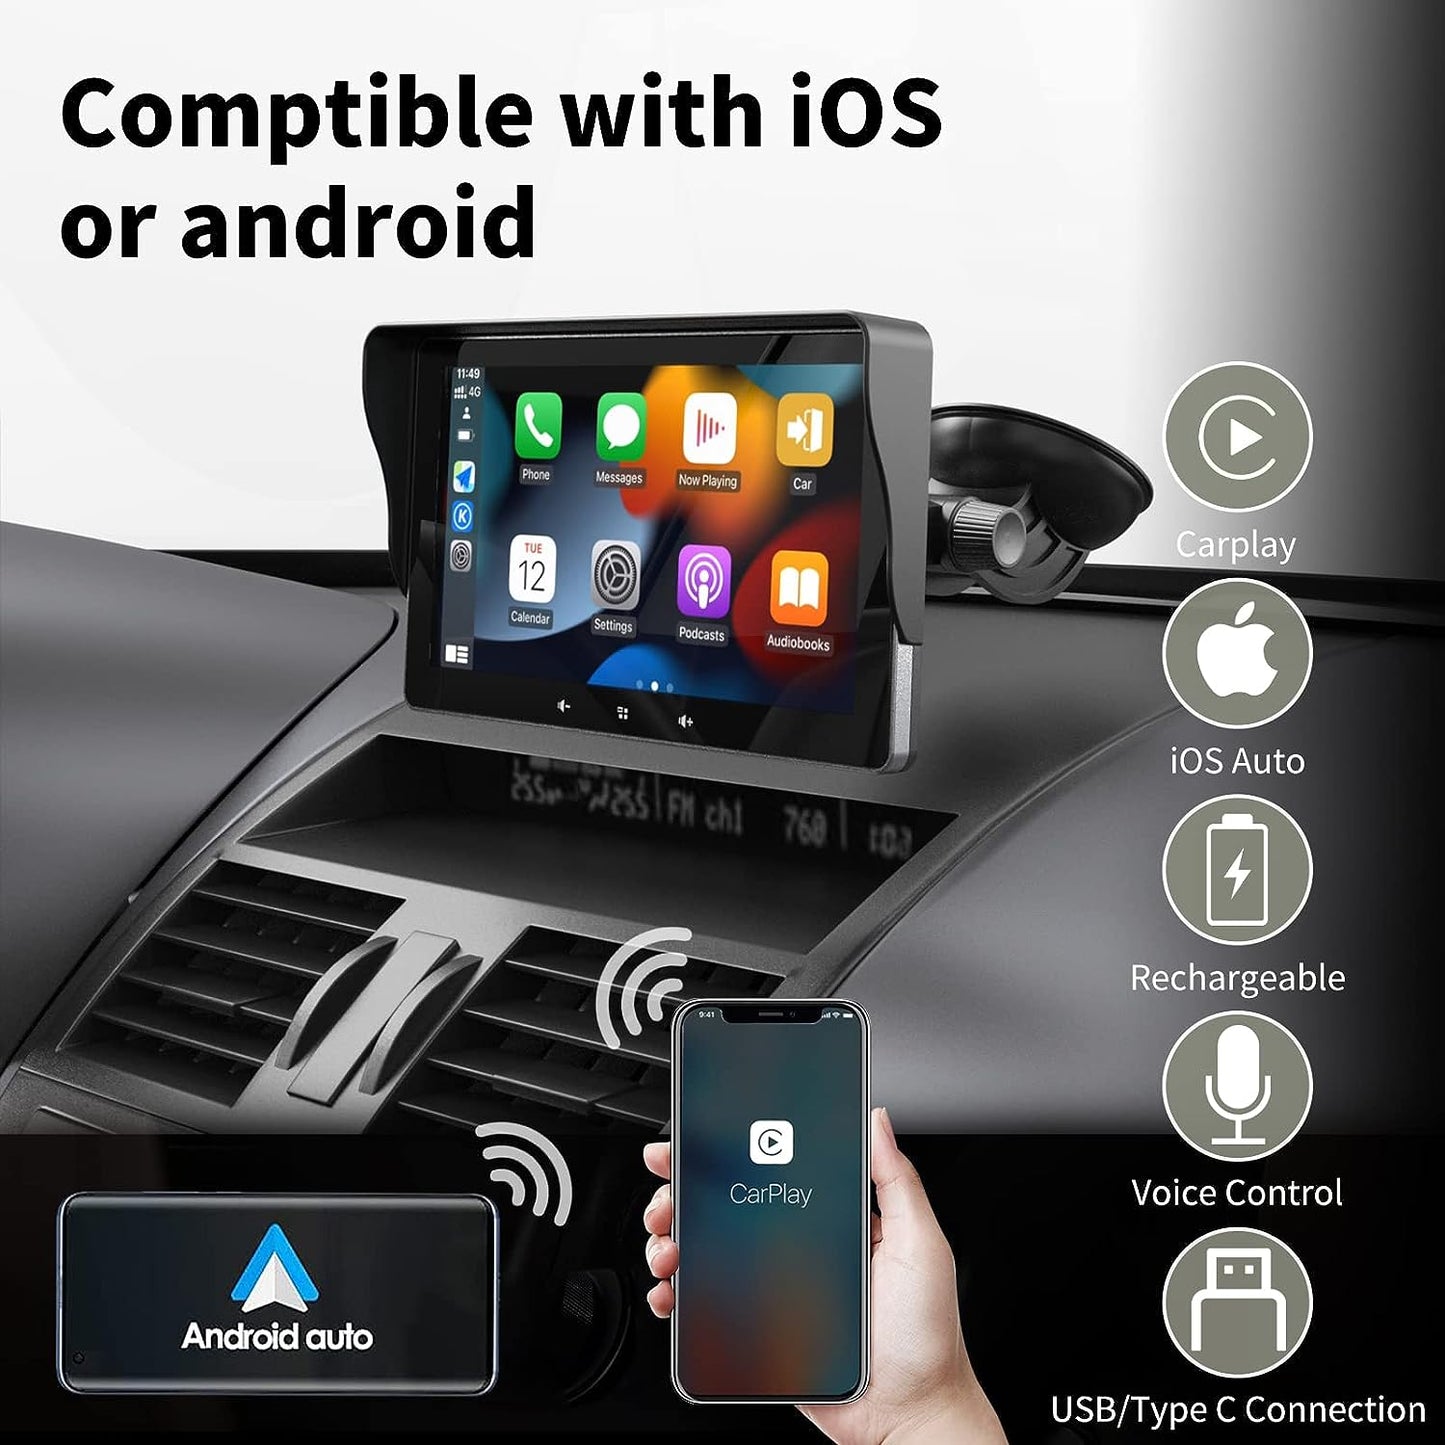 THE 7" HD Double Din Car Stereo,Portable Wireless Touch Screen Apple CarPlay and Android Auto Automatic Multimedia Player,Car Stereo with Mirror Link/Siri/Bluetooth/Navigation Screen for All Vehicles.